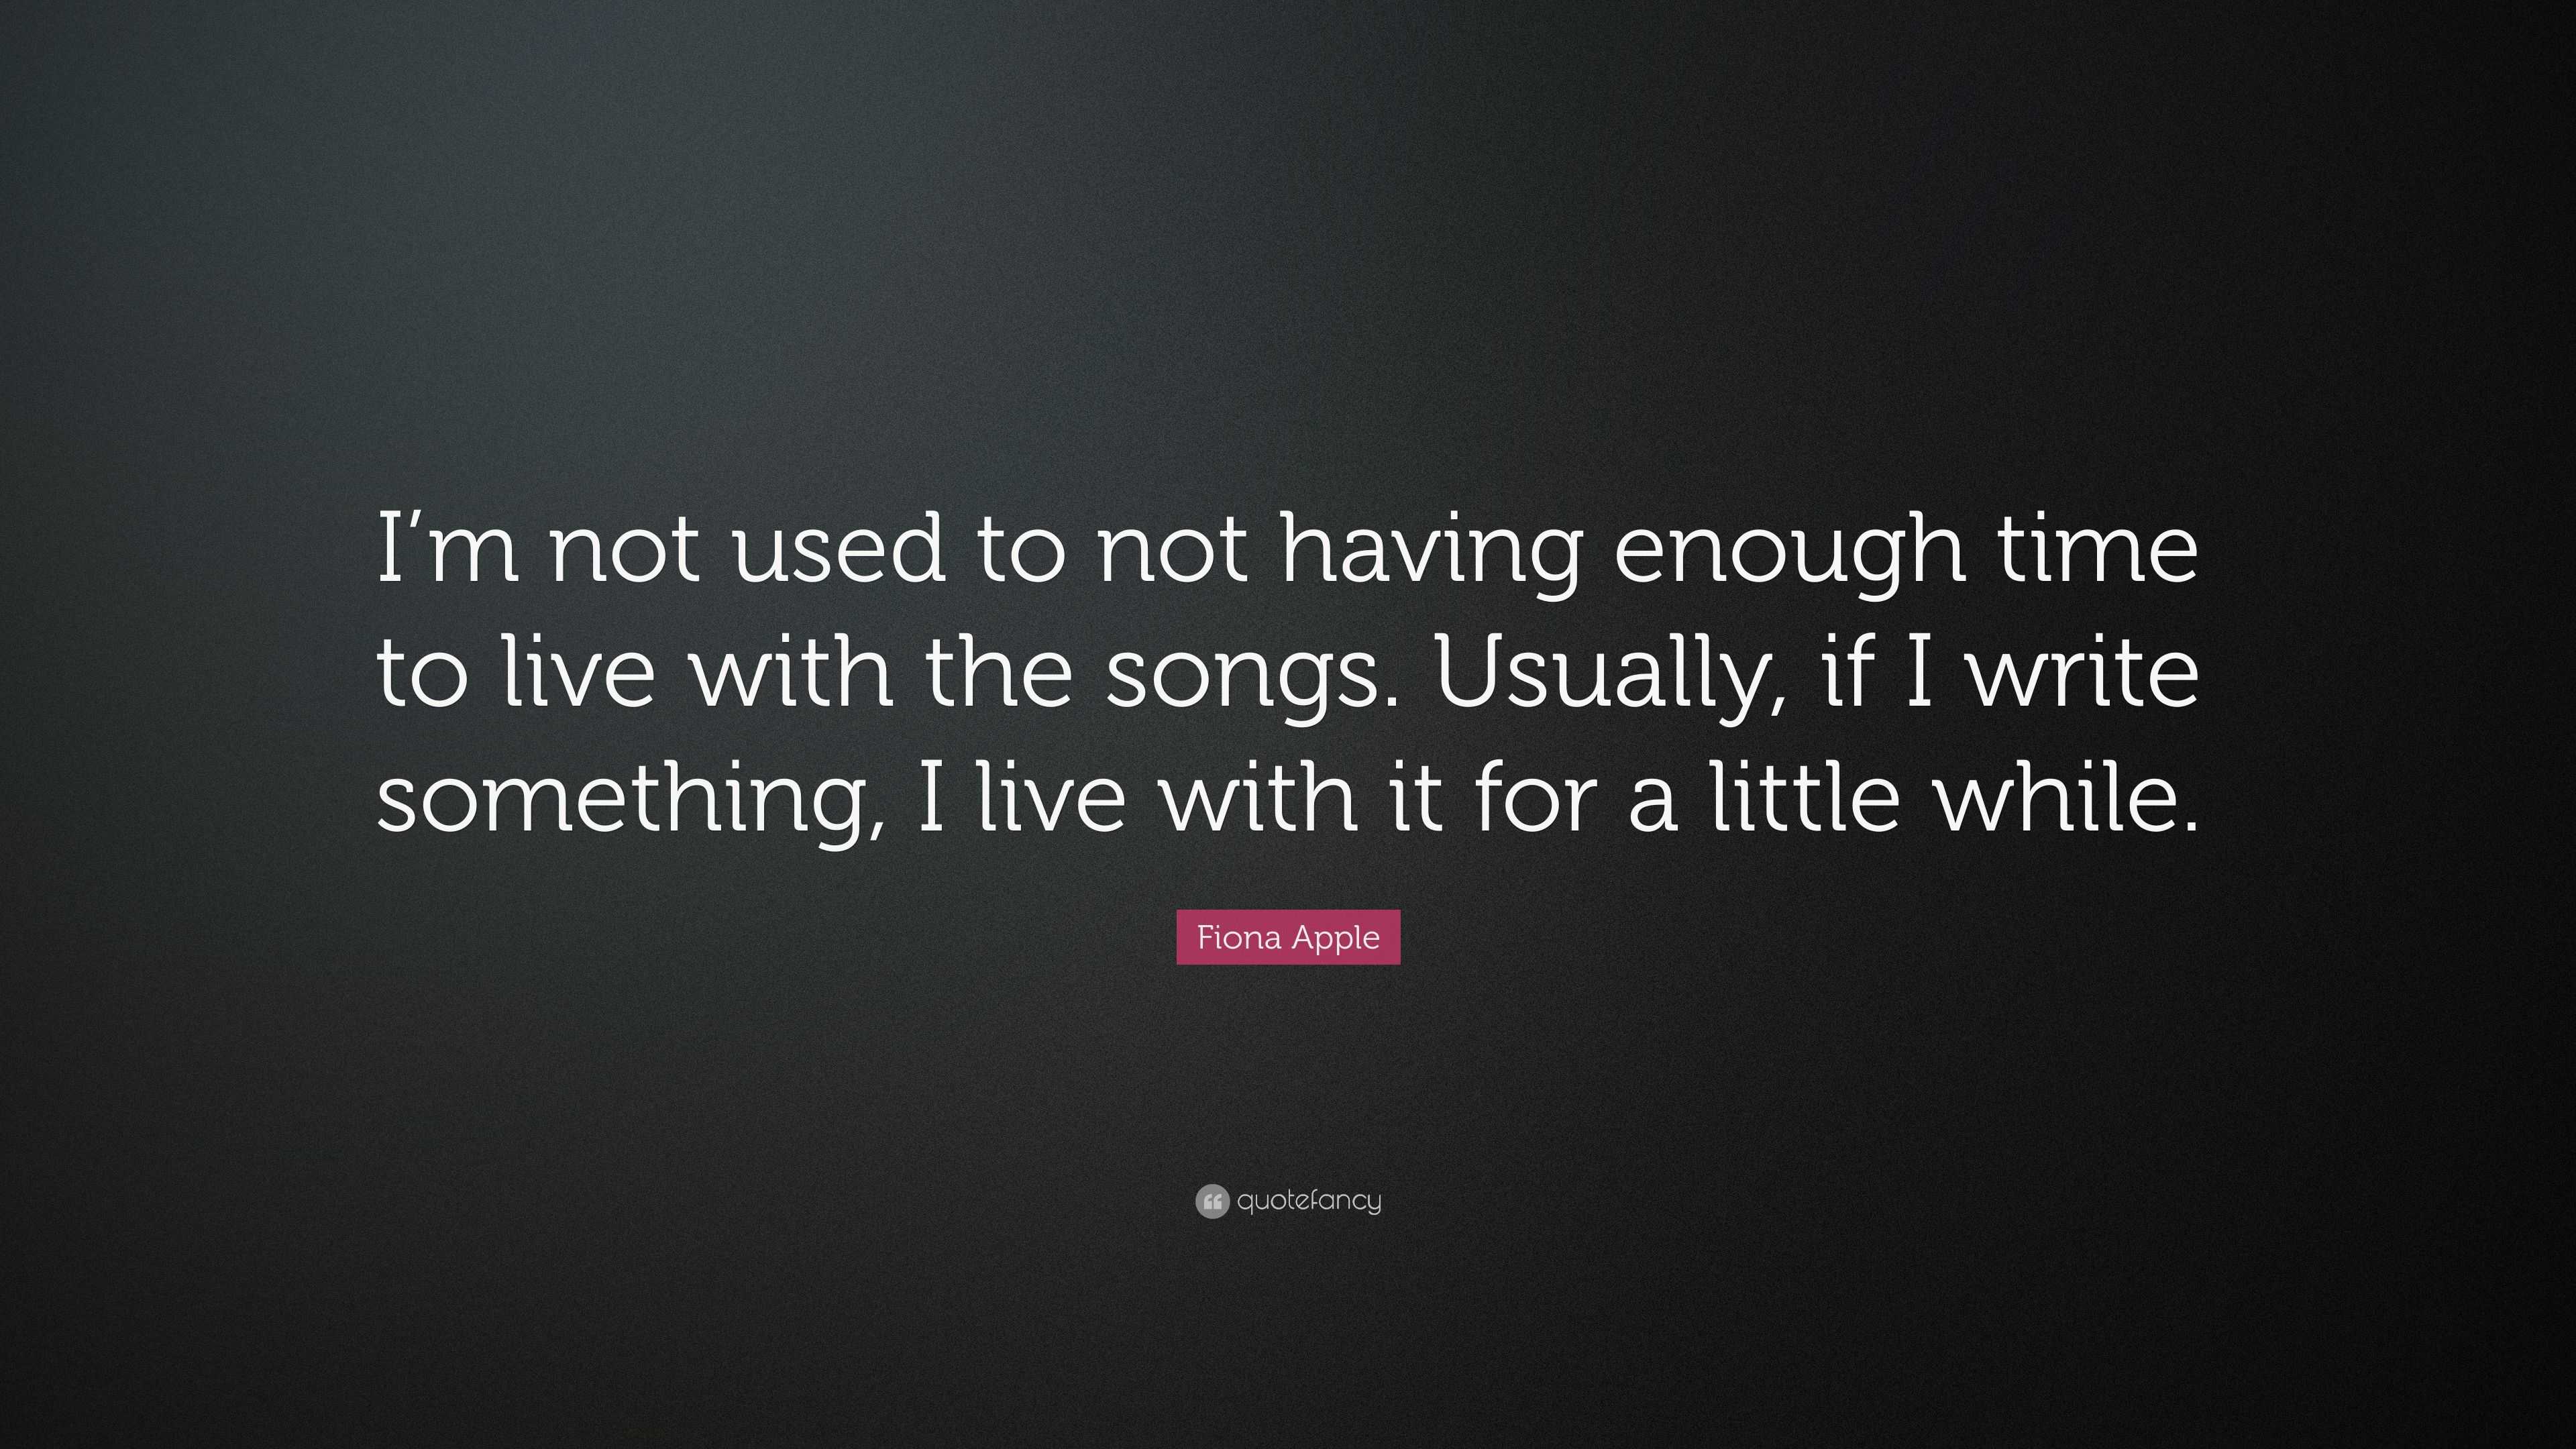 Fiona Apple Quote: “I’m not used to not having enough time to live with ...